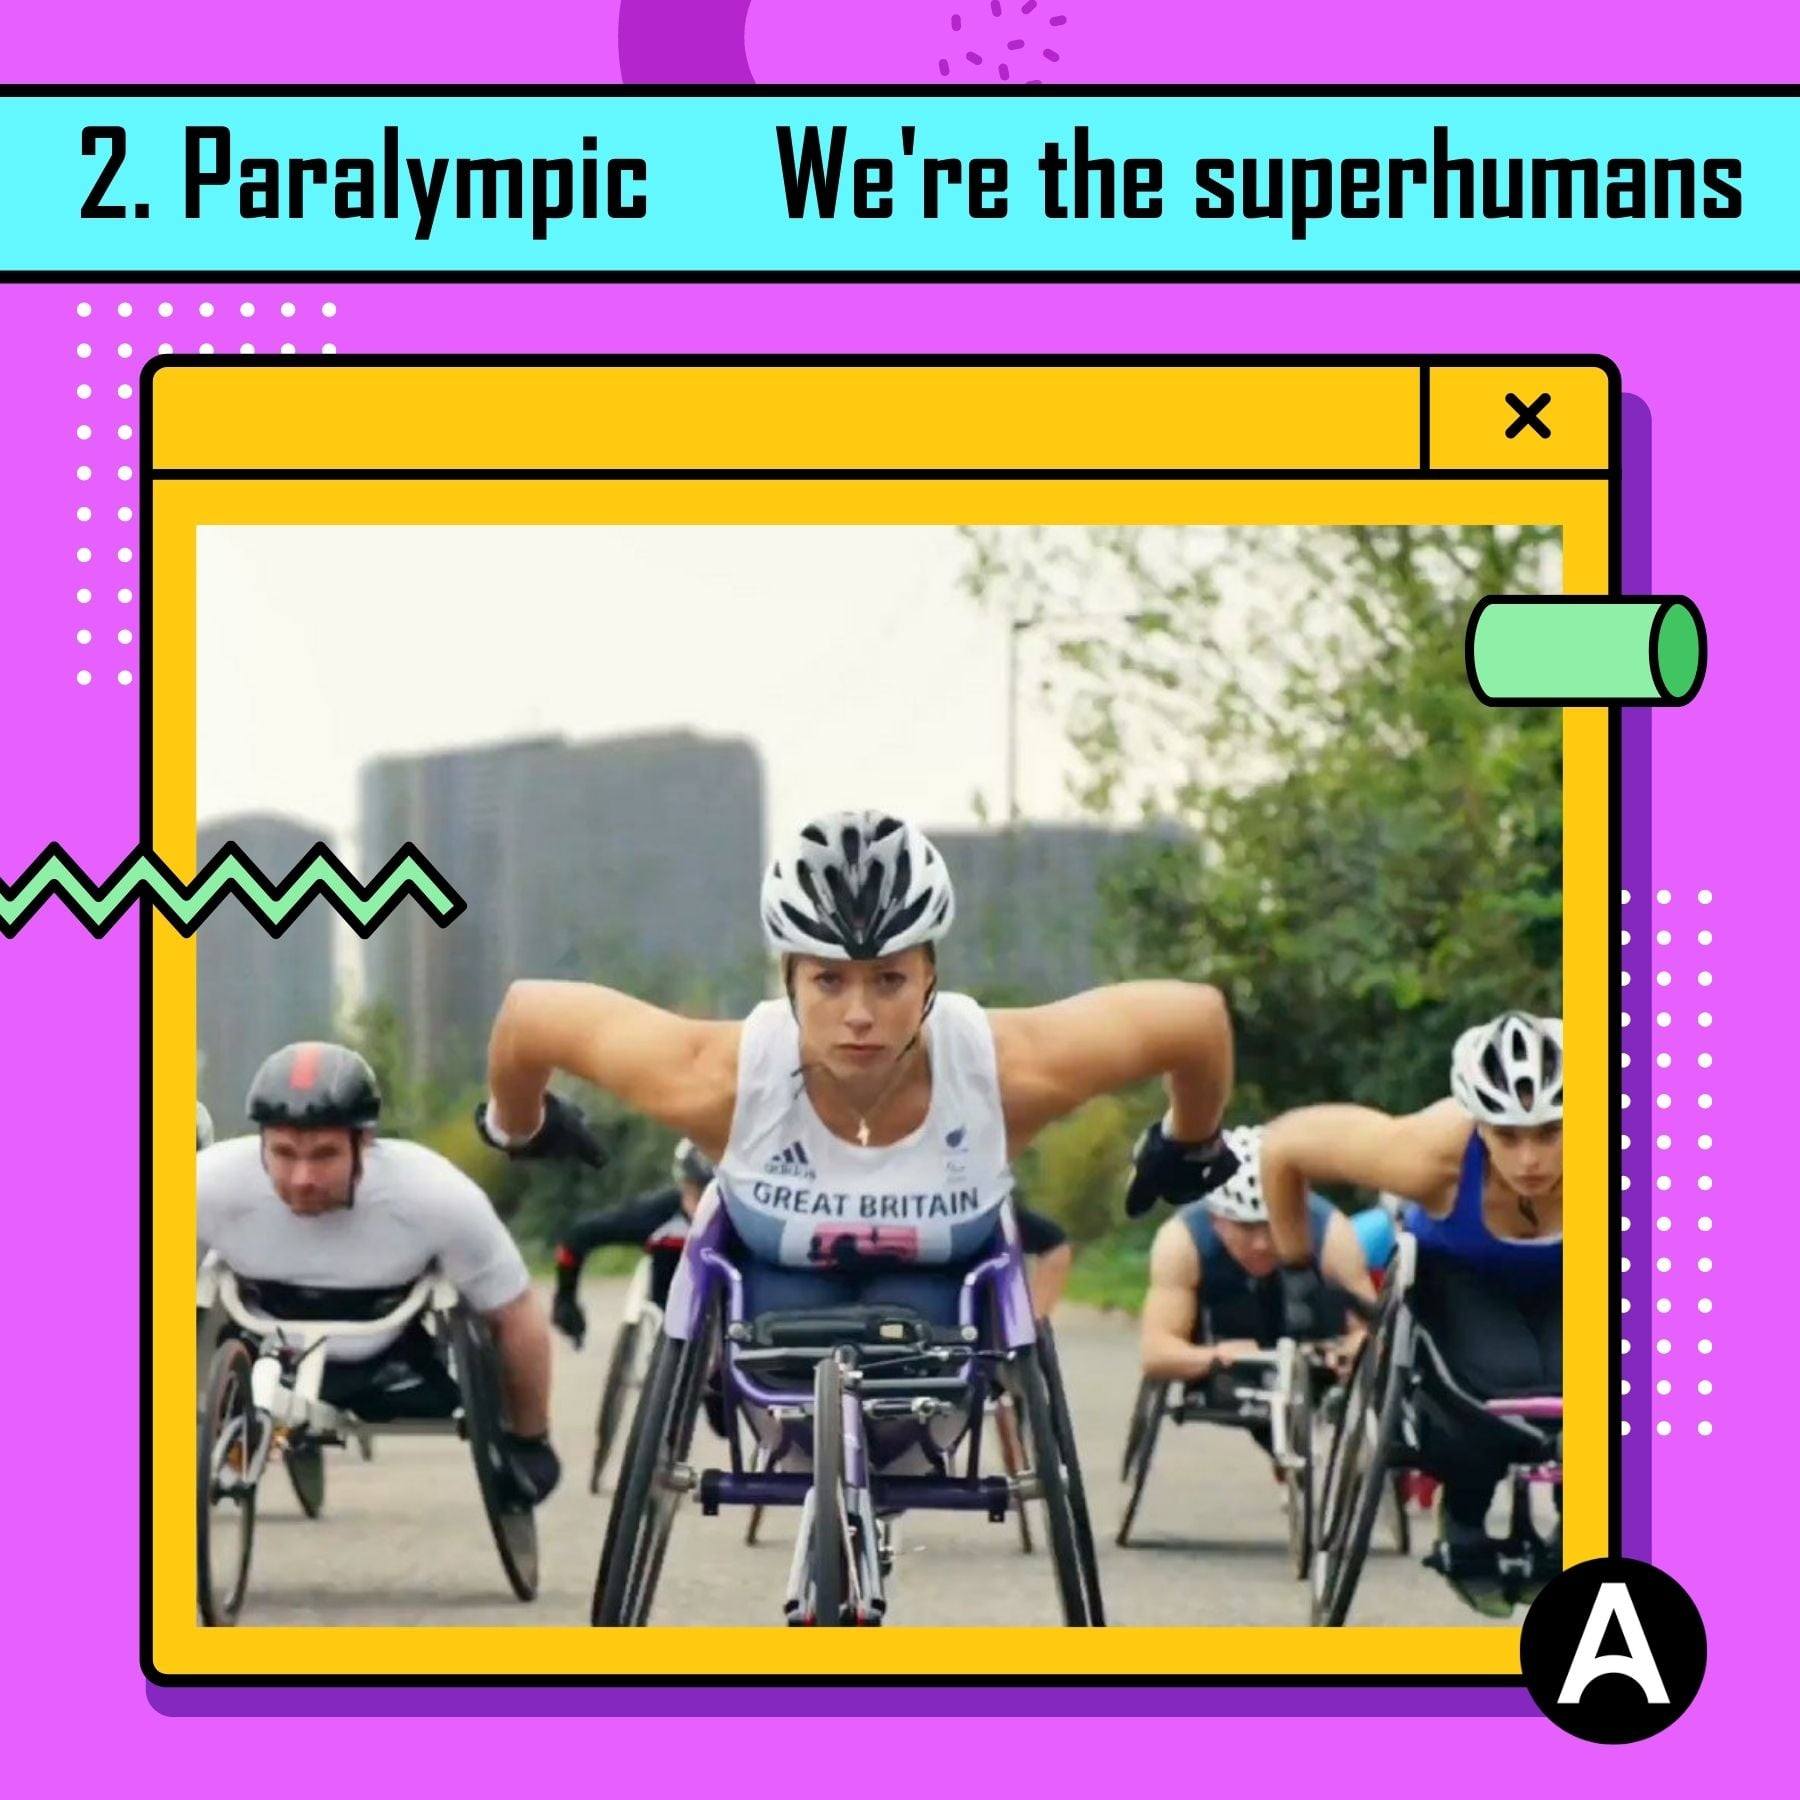 Paralympic, “We're the superhumans”